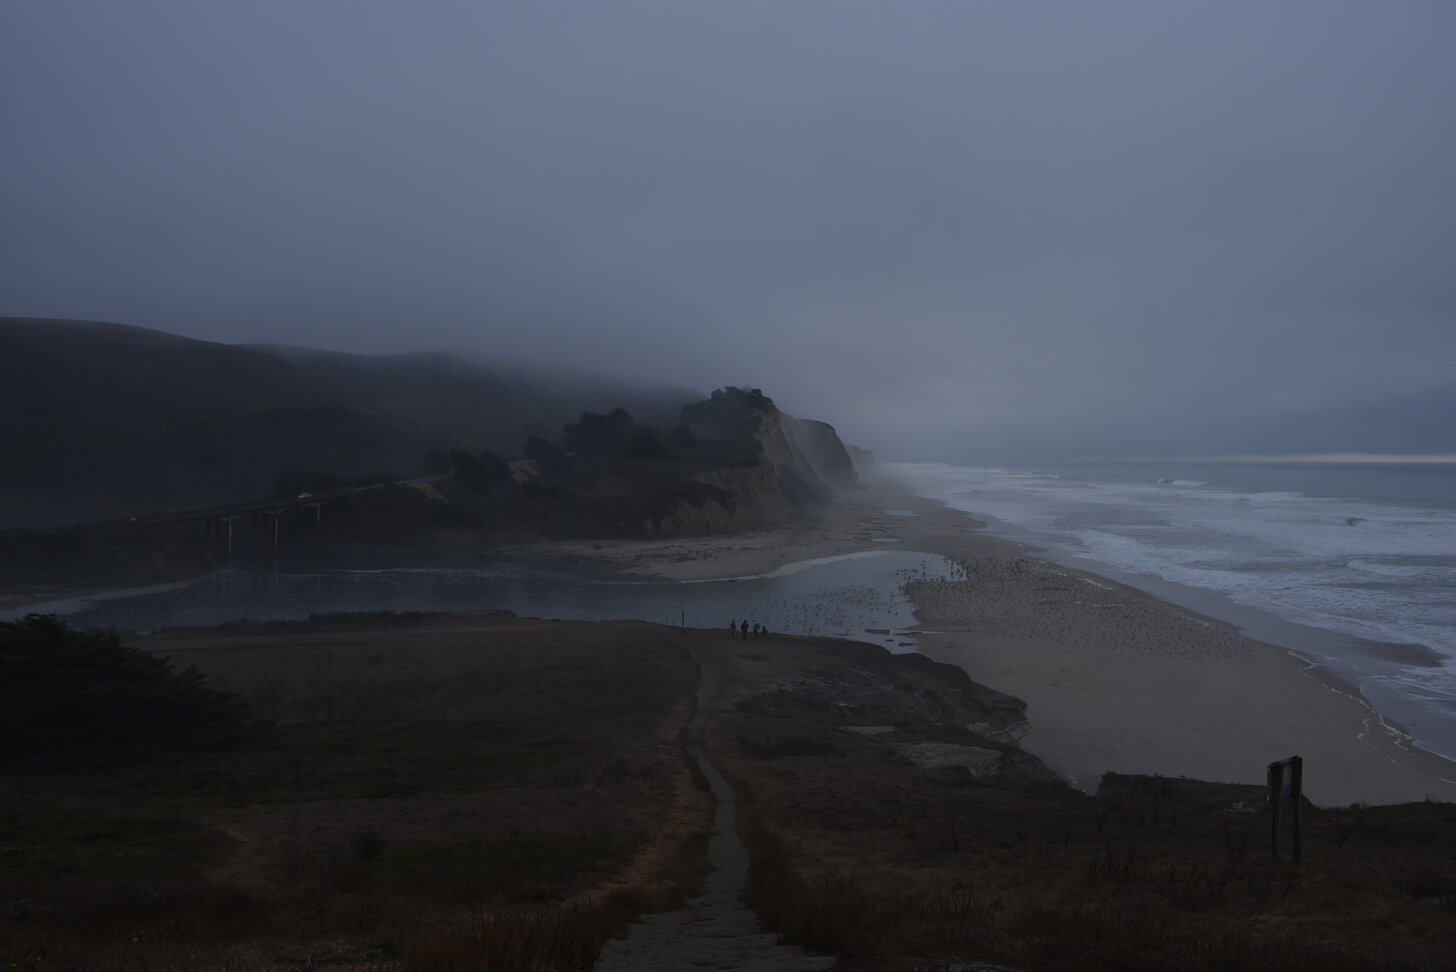 Foggy evening at San Gregorio State Beach, before the pandemic started.